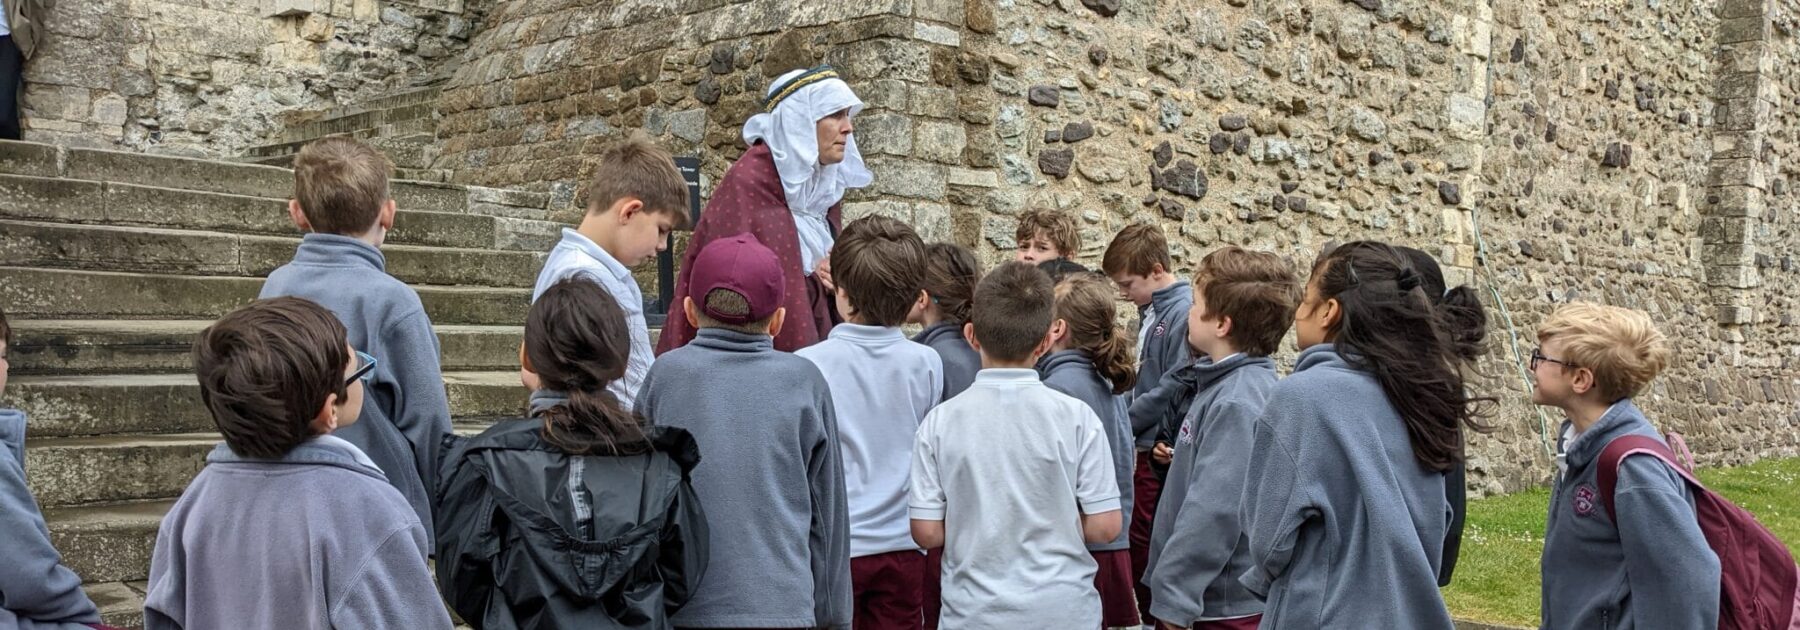 Year 4 Tour Dover Castle with Lady Eleanor of Aquitaine